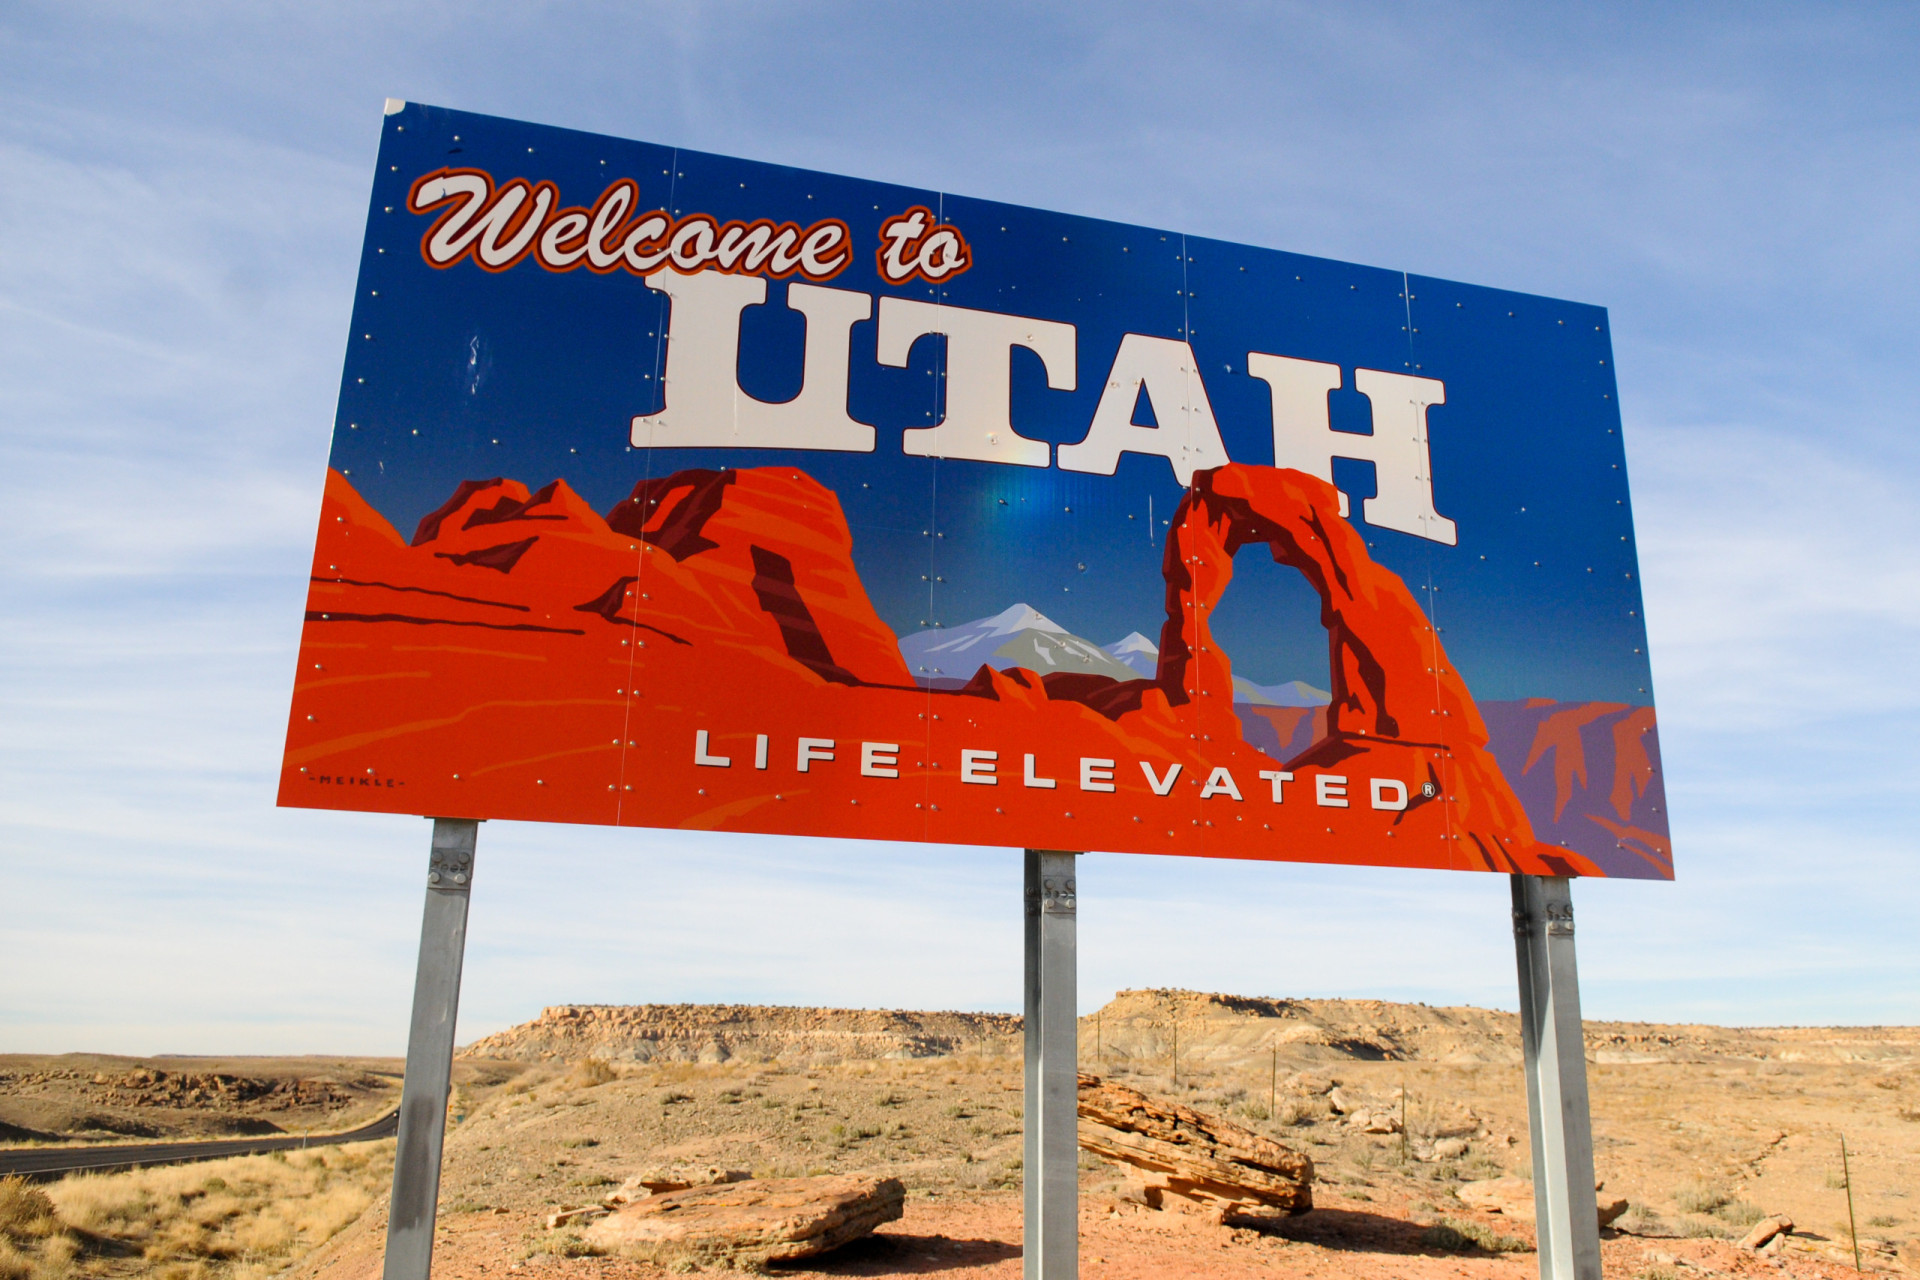 <p>Utah is home to amazing scenery, a fact reflected in the state's welcome sign. Zion National Park, Arches National Park, and Bryce Canyon National Park, are some of the state's most popular destinations. </p>